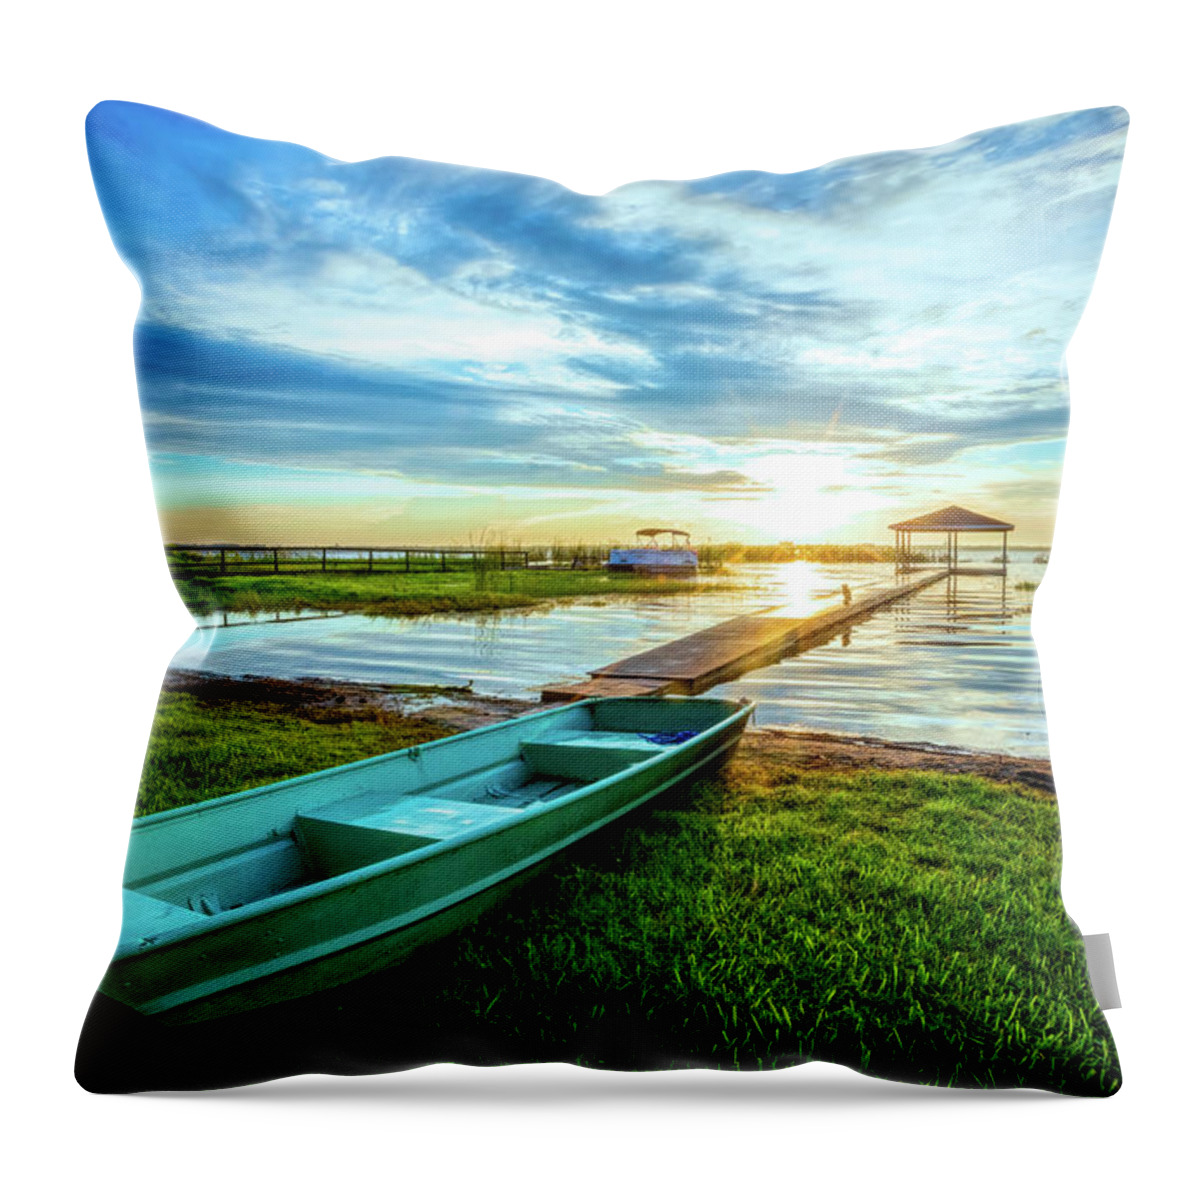 Docks Throw Pillow featuring the photograph Rowboat at the Water's Edge by Debra and Dave Vanderlaan